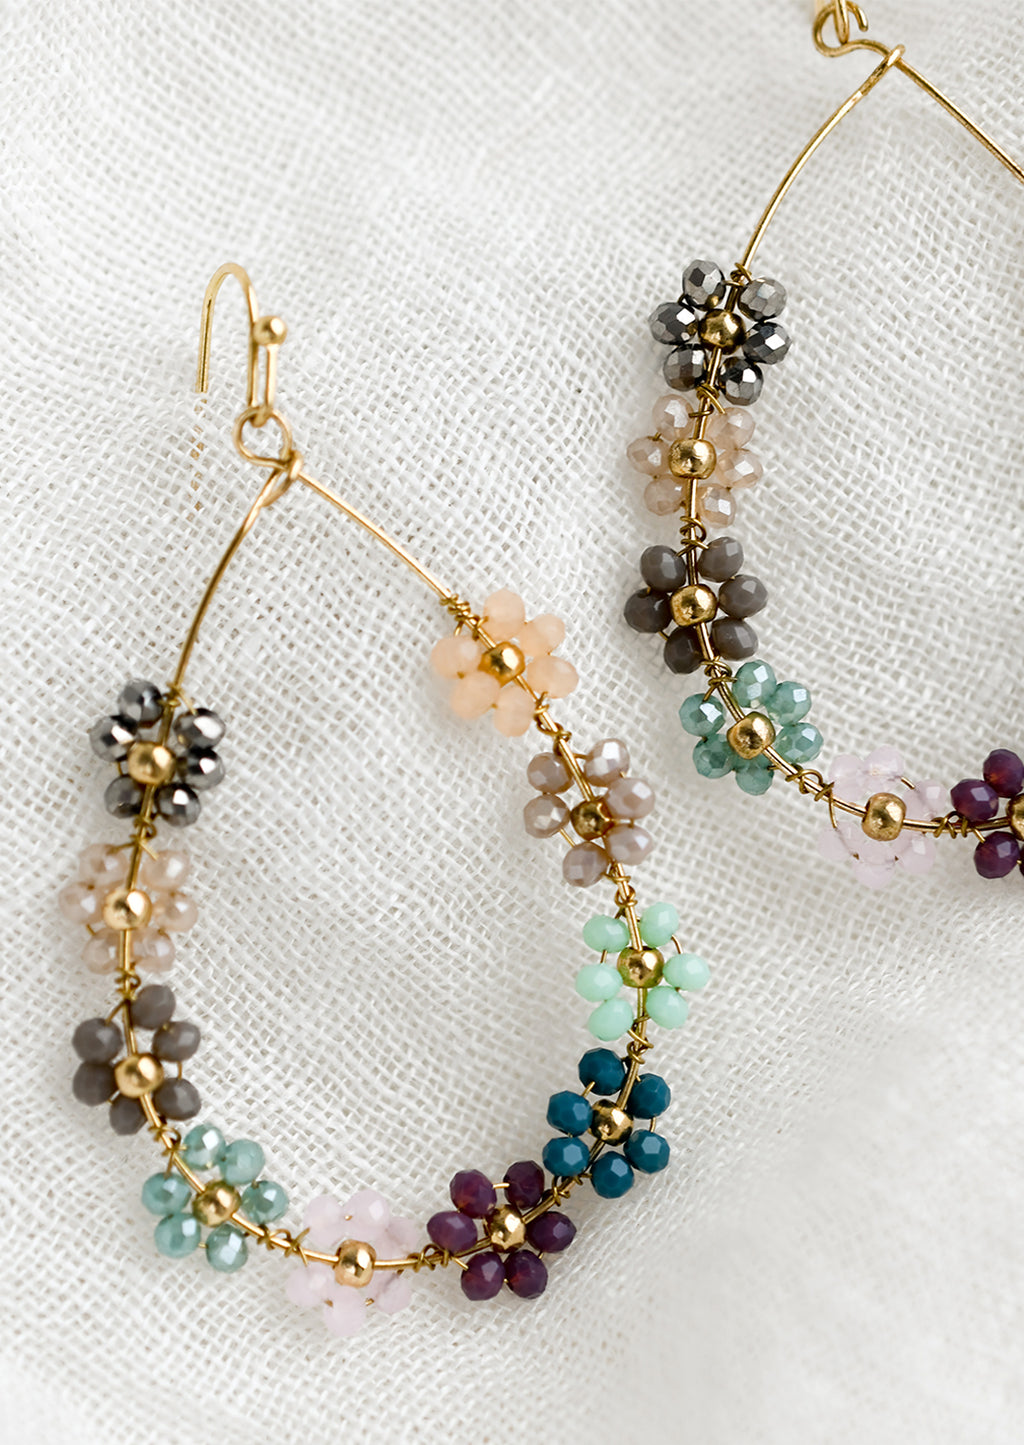 Cool Multi: A pair of gold teardrop wire earrings with cool hued floral beading.